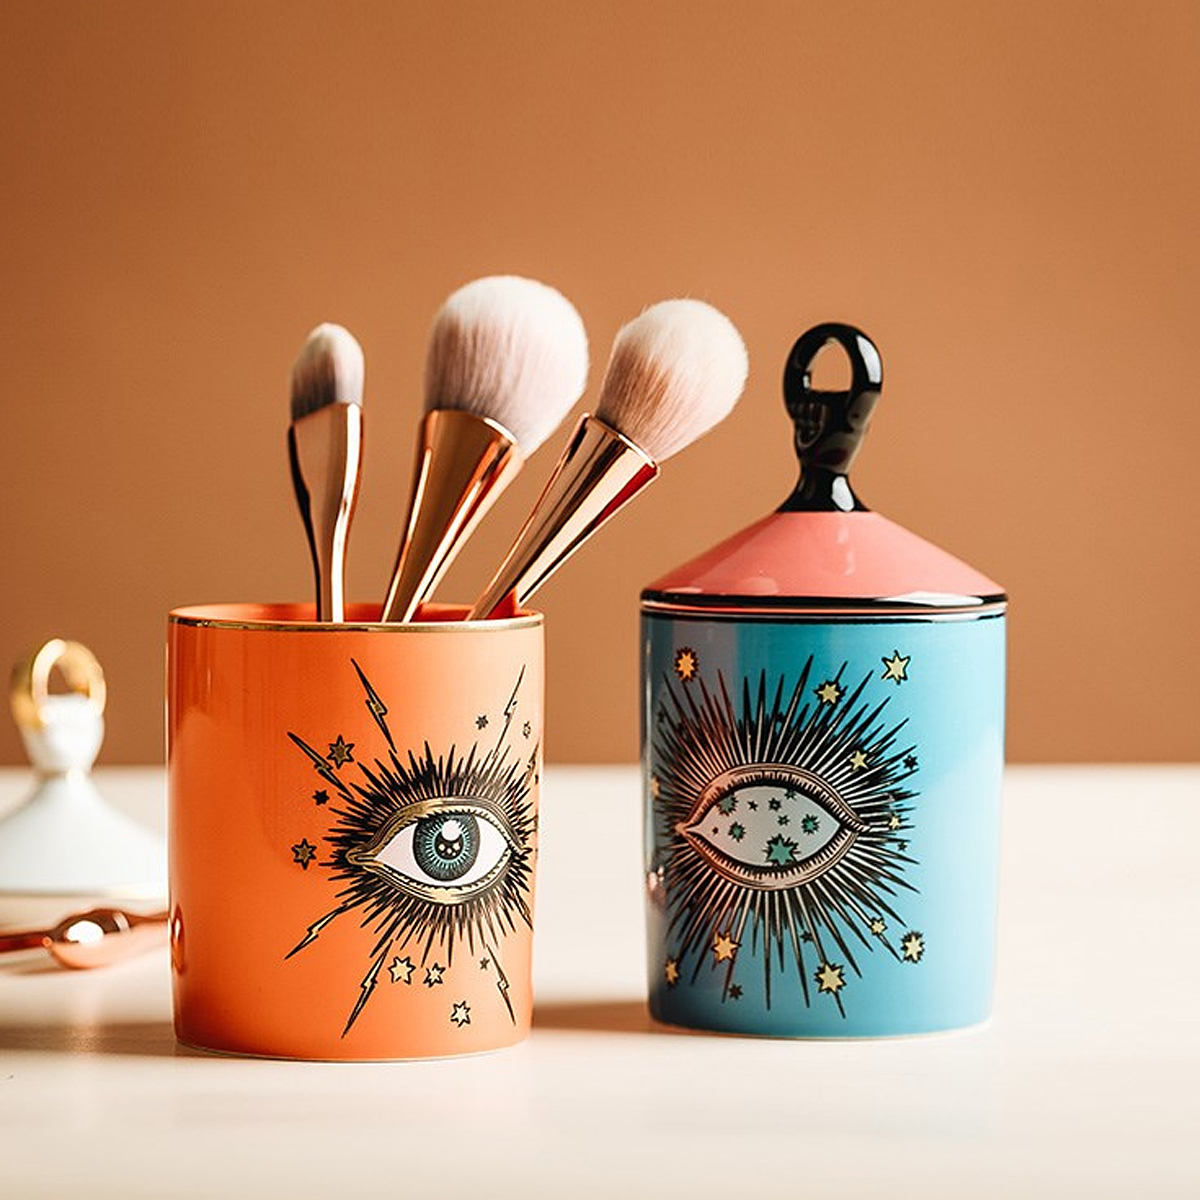 Big-Eyes-Jar-Hands-with-Ceramic-Lids-Decorative-Cans-Candle-Holders-Storage-Cans-Cosmetic-Storage-Ta-1649421-5